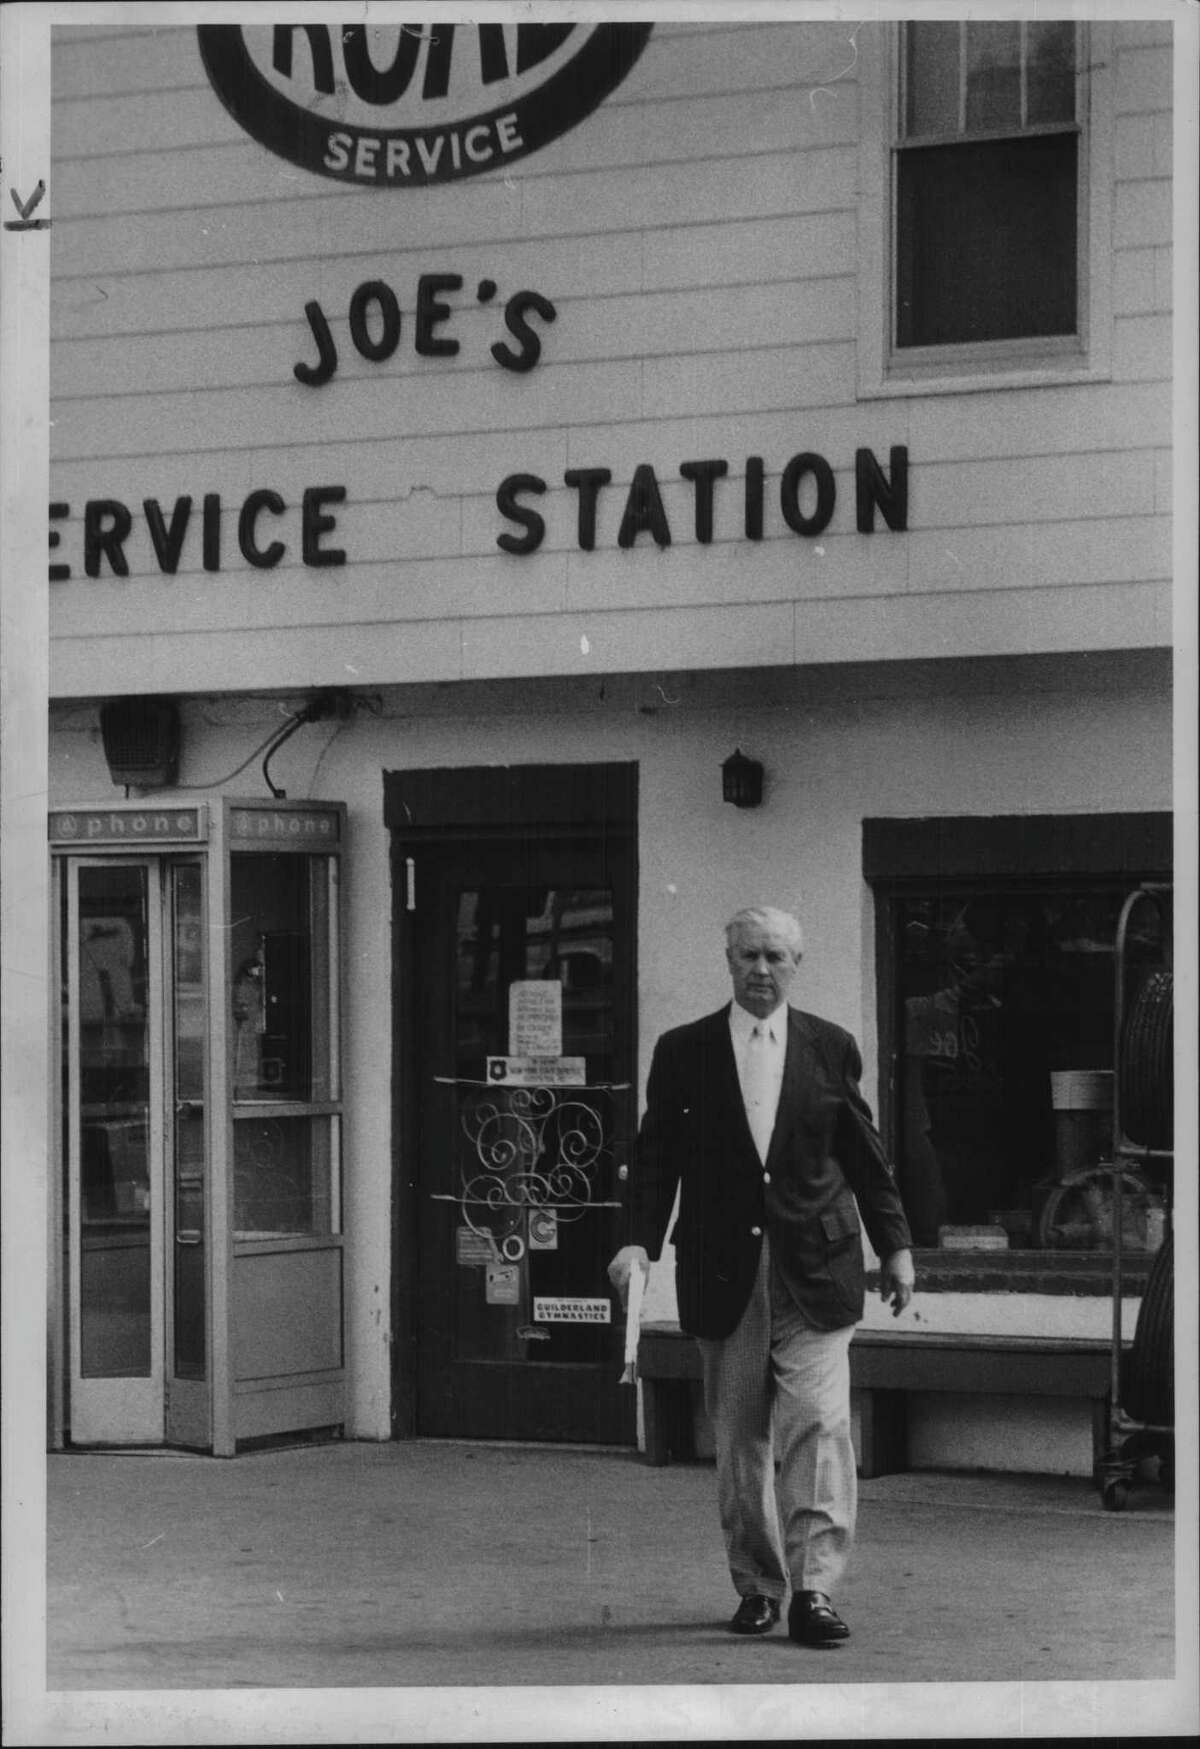 Joe's Service Station, Guilderland, New York _ Kenneth Weafer, Albany County dealer of weight and measures, leaves service station on Route 20 & 146 - Joseph Calabro, owner. June 14, 1979 (Raymond B. Summers/Times Union Archive)